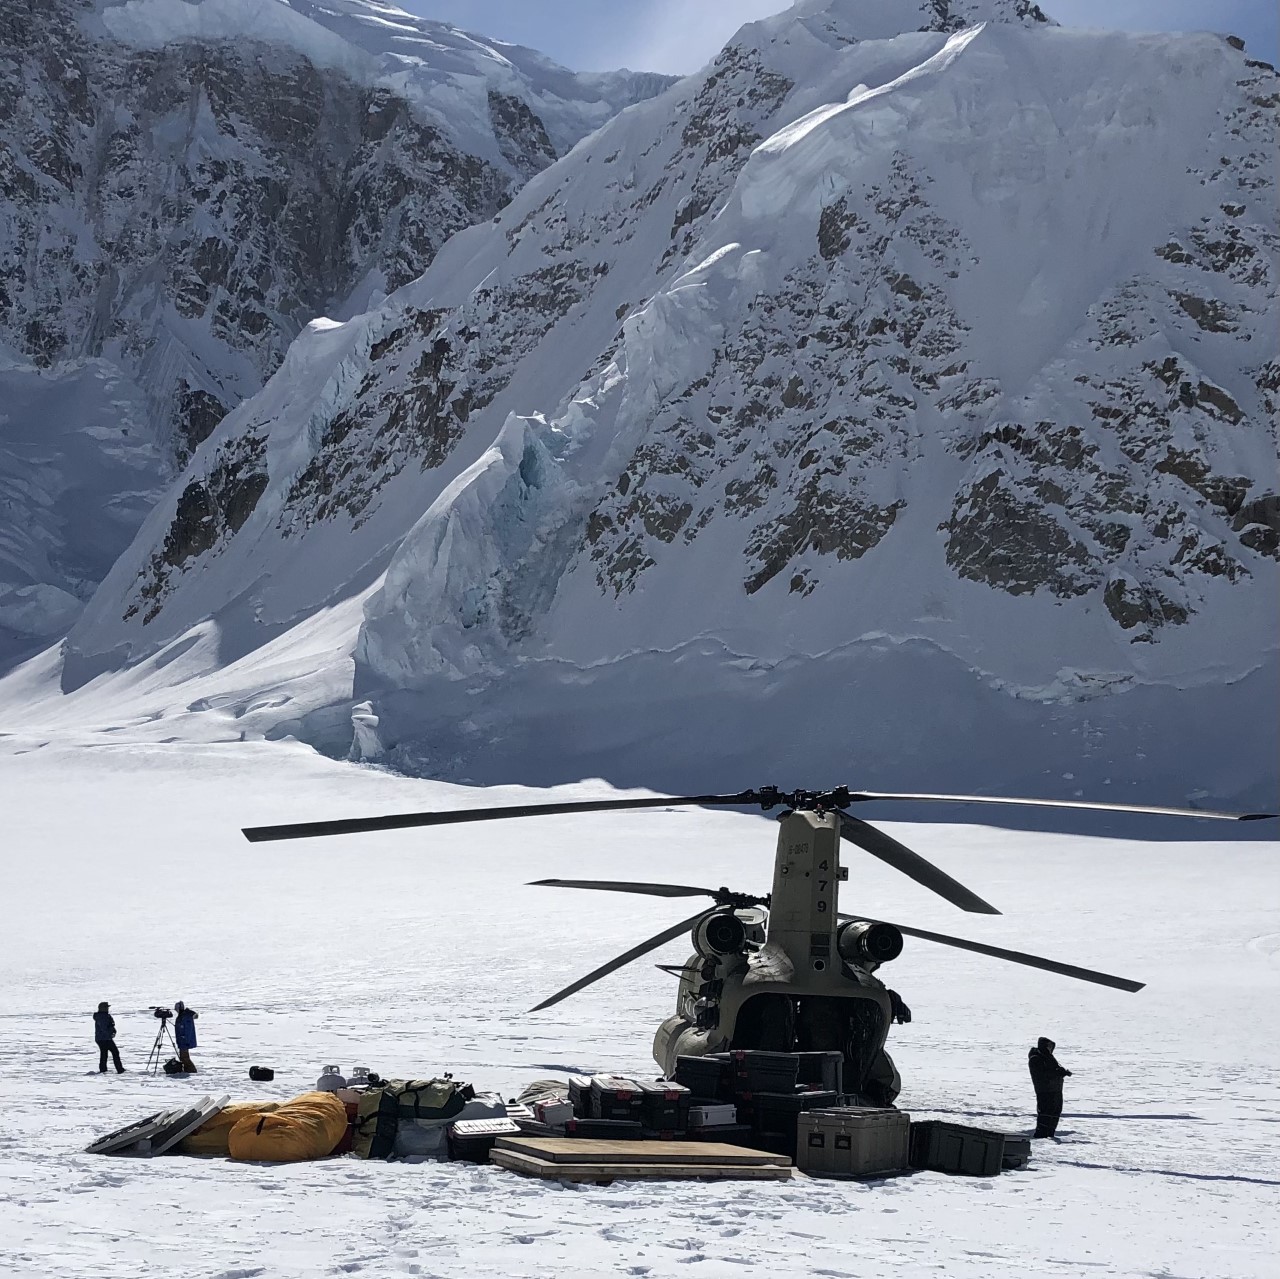 Chinook military helicopter sits on a glacier at the base of a mountain slope, surrounded by a large pile of plastic packing boxes and plywood sheets.